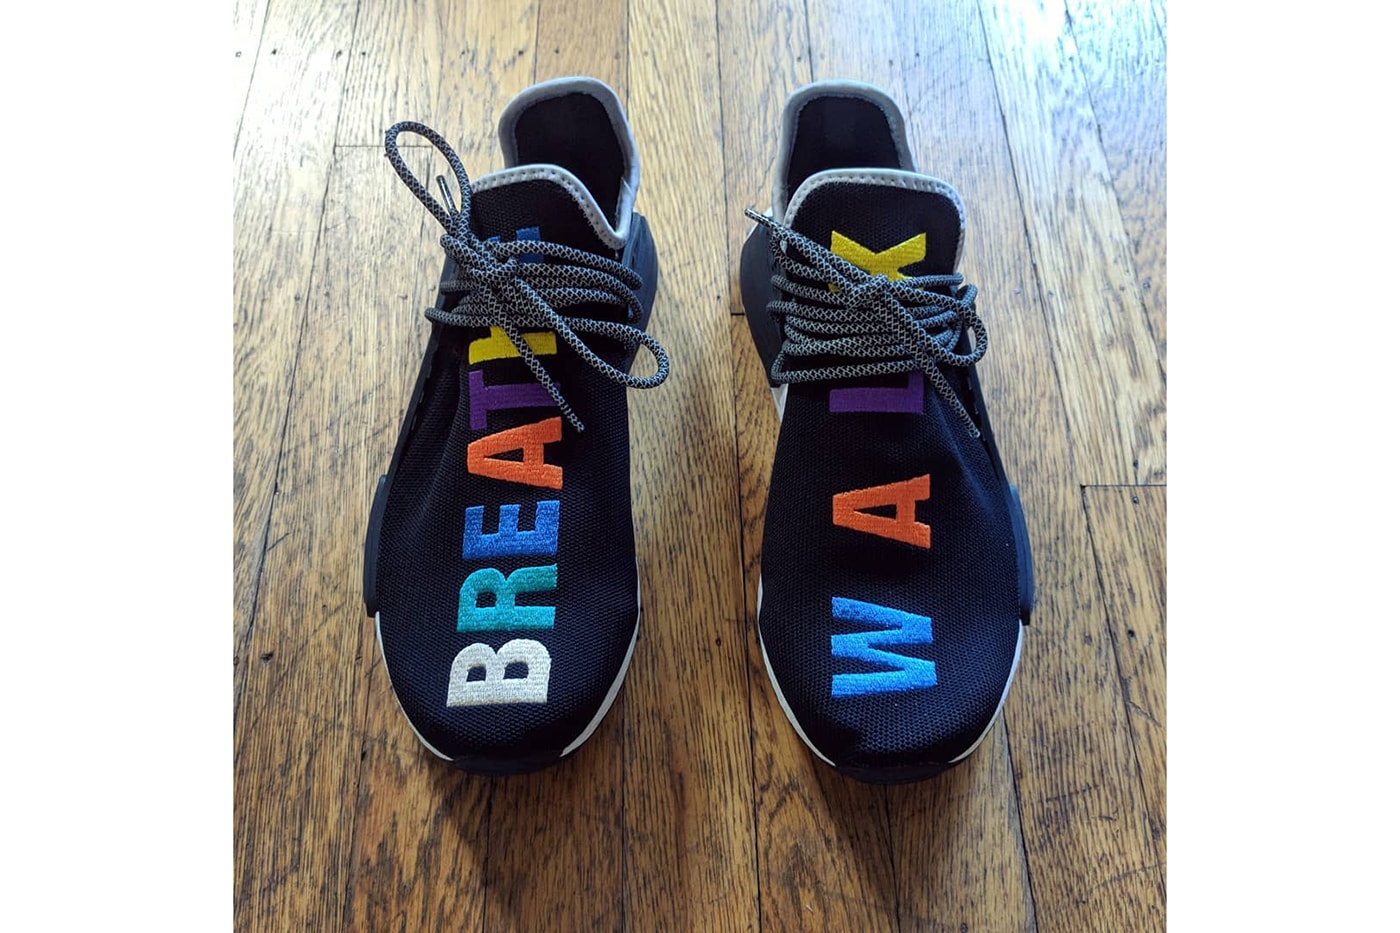 Jon Wexler Pharrell Williams adidas NMD Hu Trail friends and family exclusive sneaker black multicolor